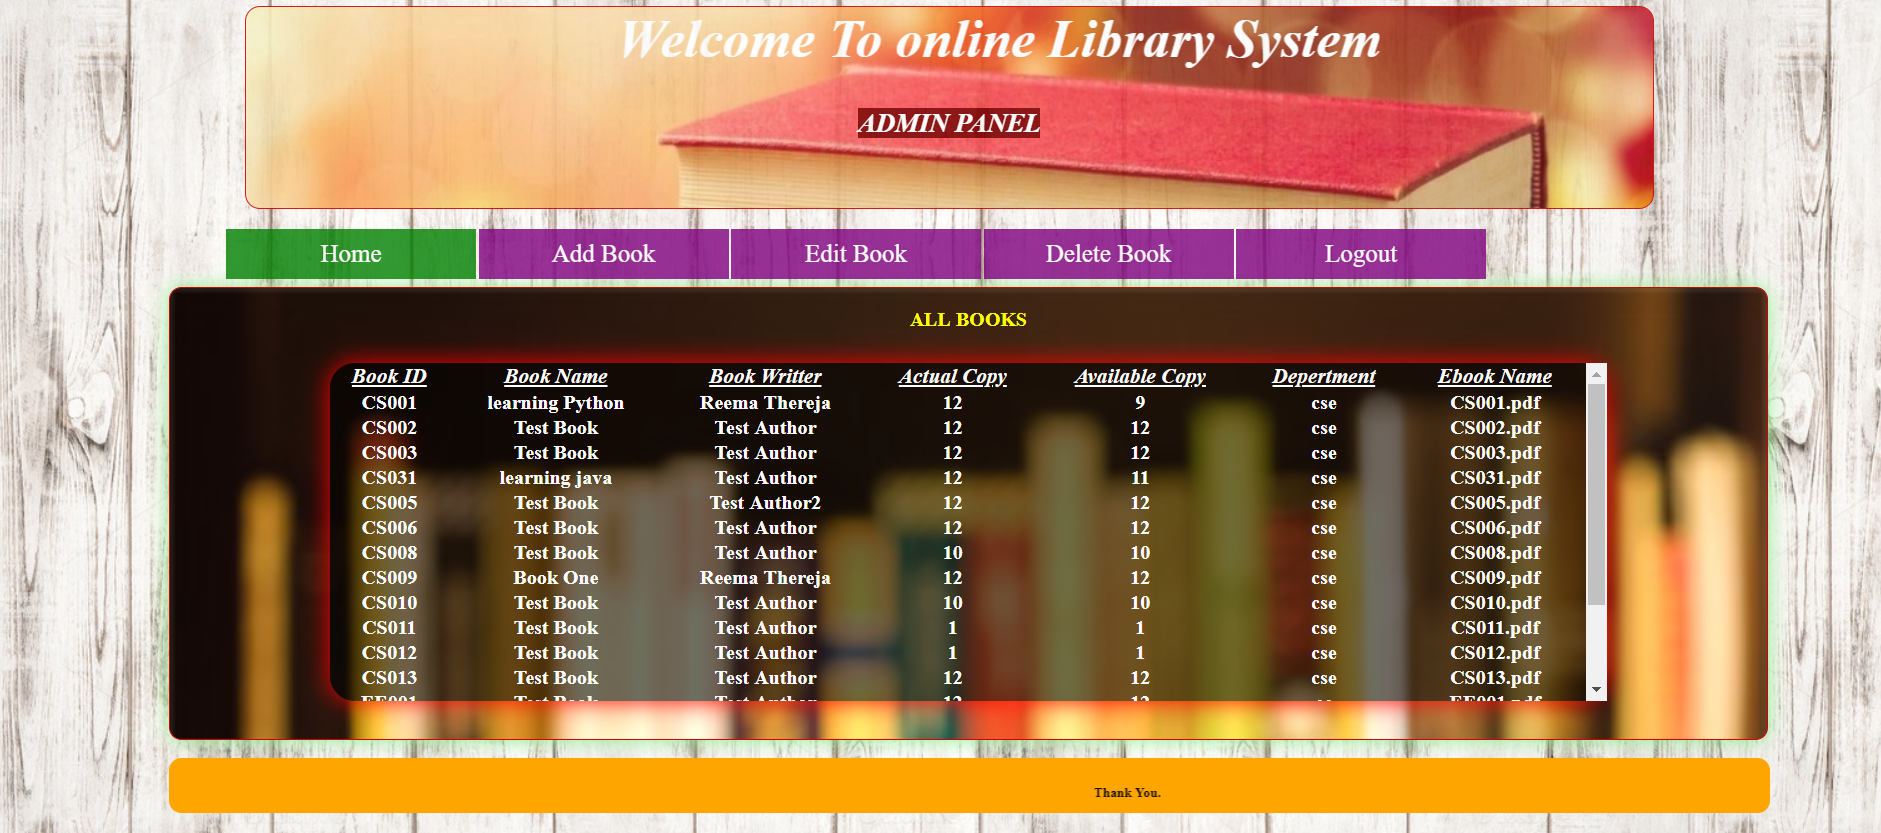 image of library system